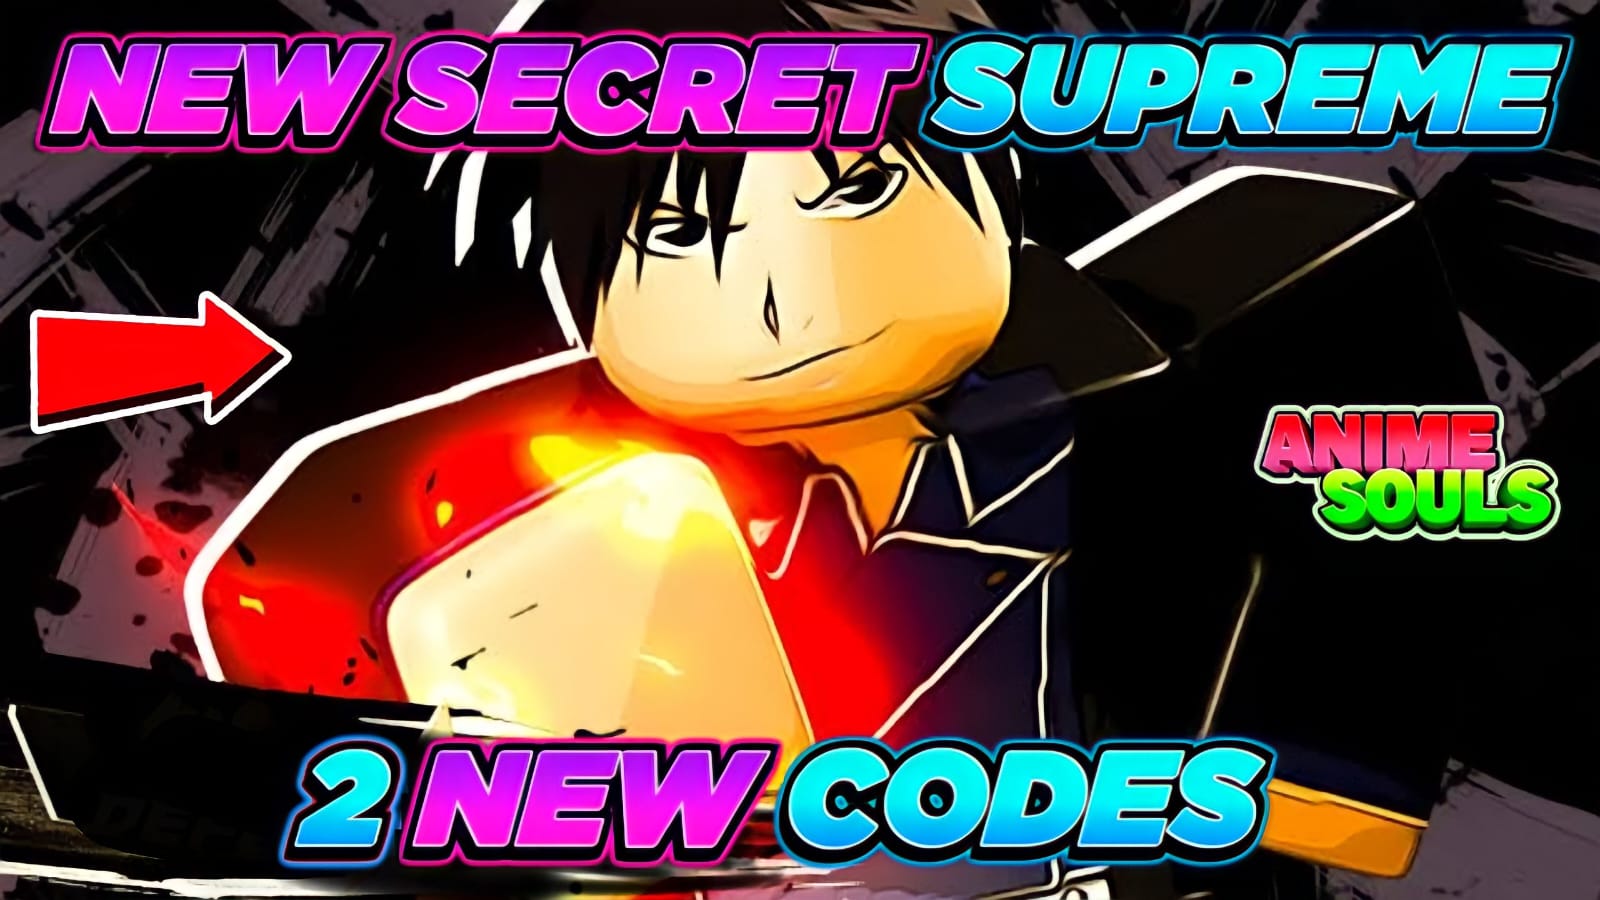 ALL NEW *SECRET* UPDATE CODES in ANIME SOULS SIMULATOR CODES